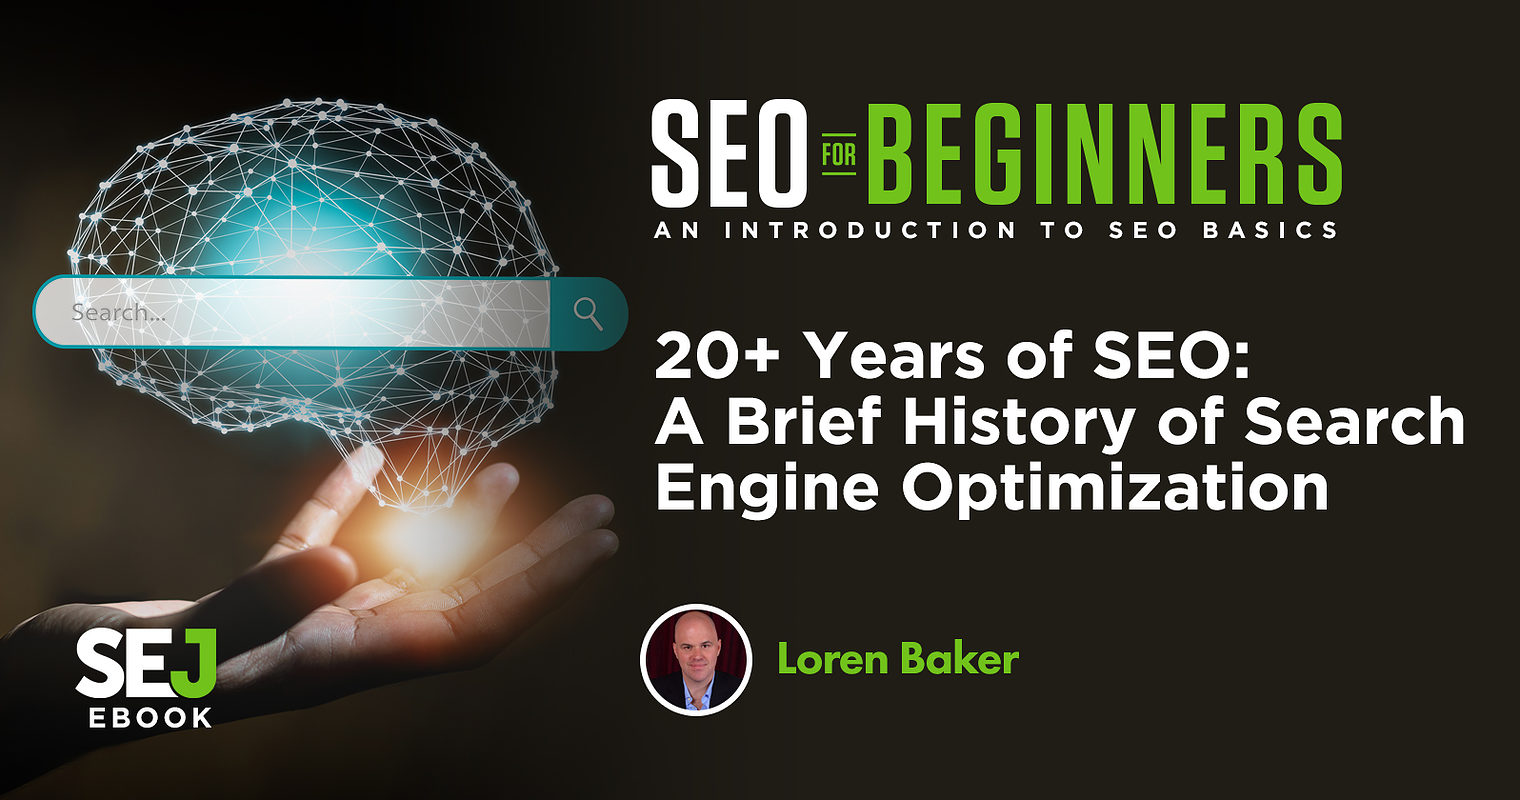 20+ Years of SEO: A Brief History of Search Engine Optimization